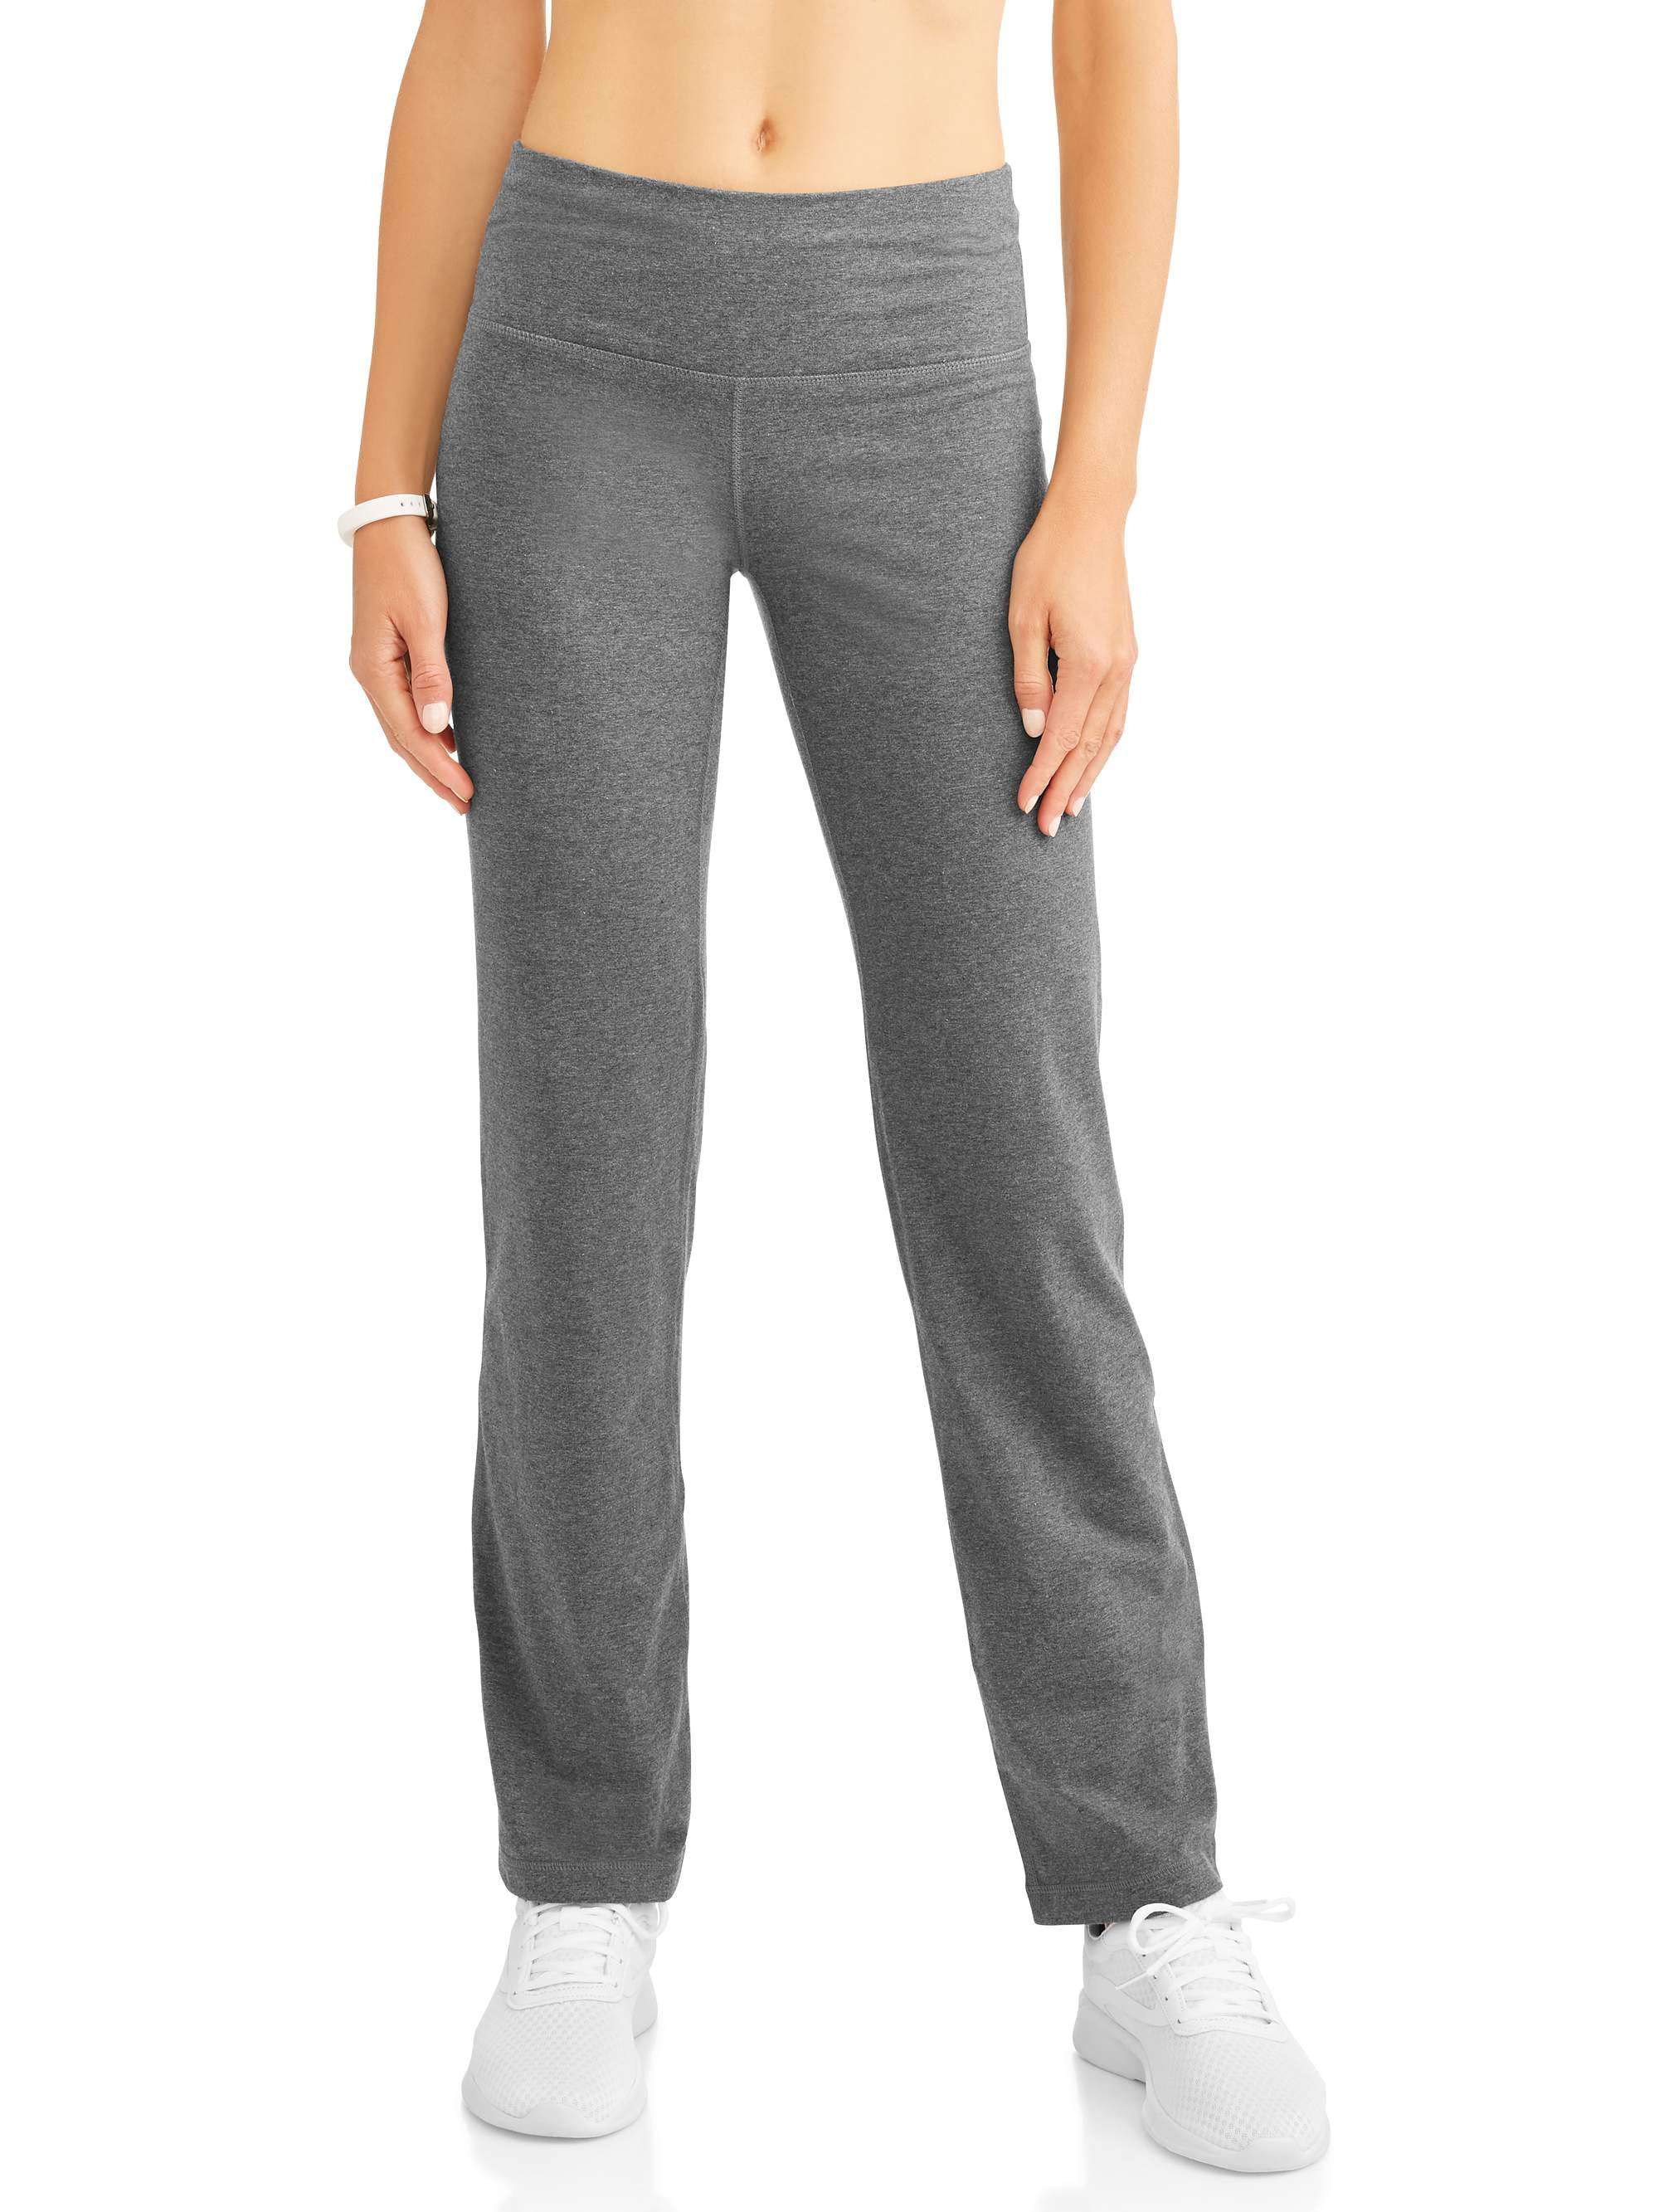 athletic works pants womens